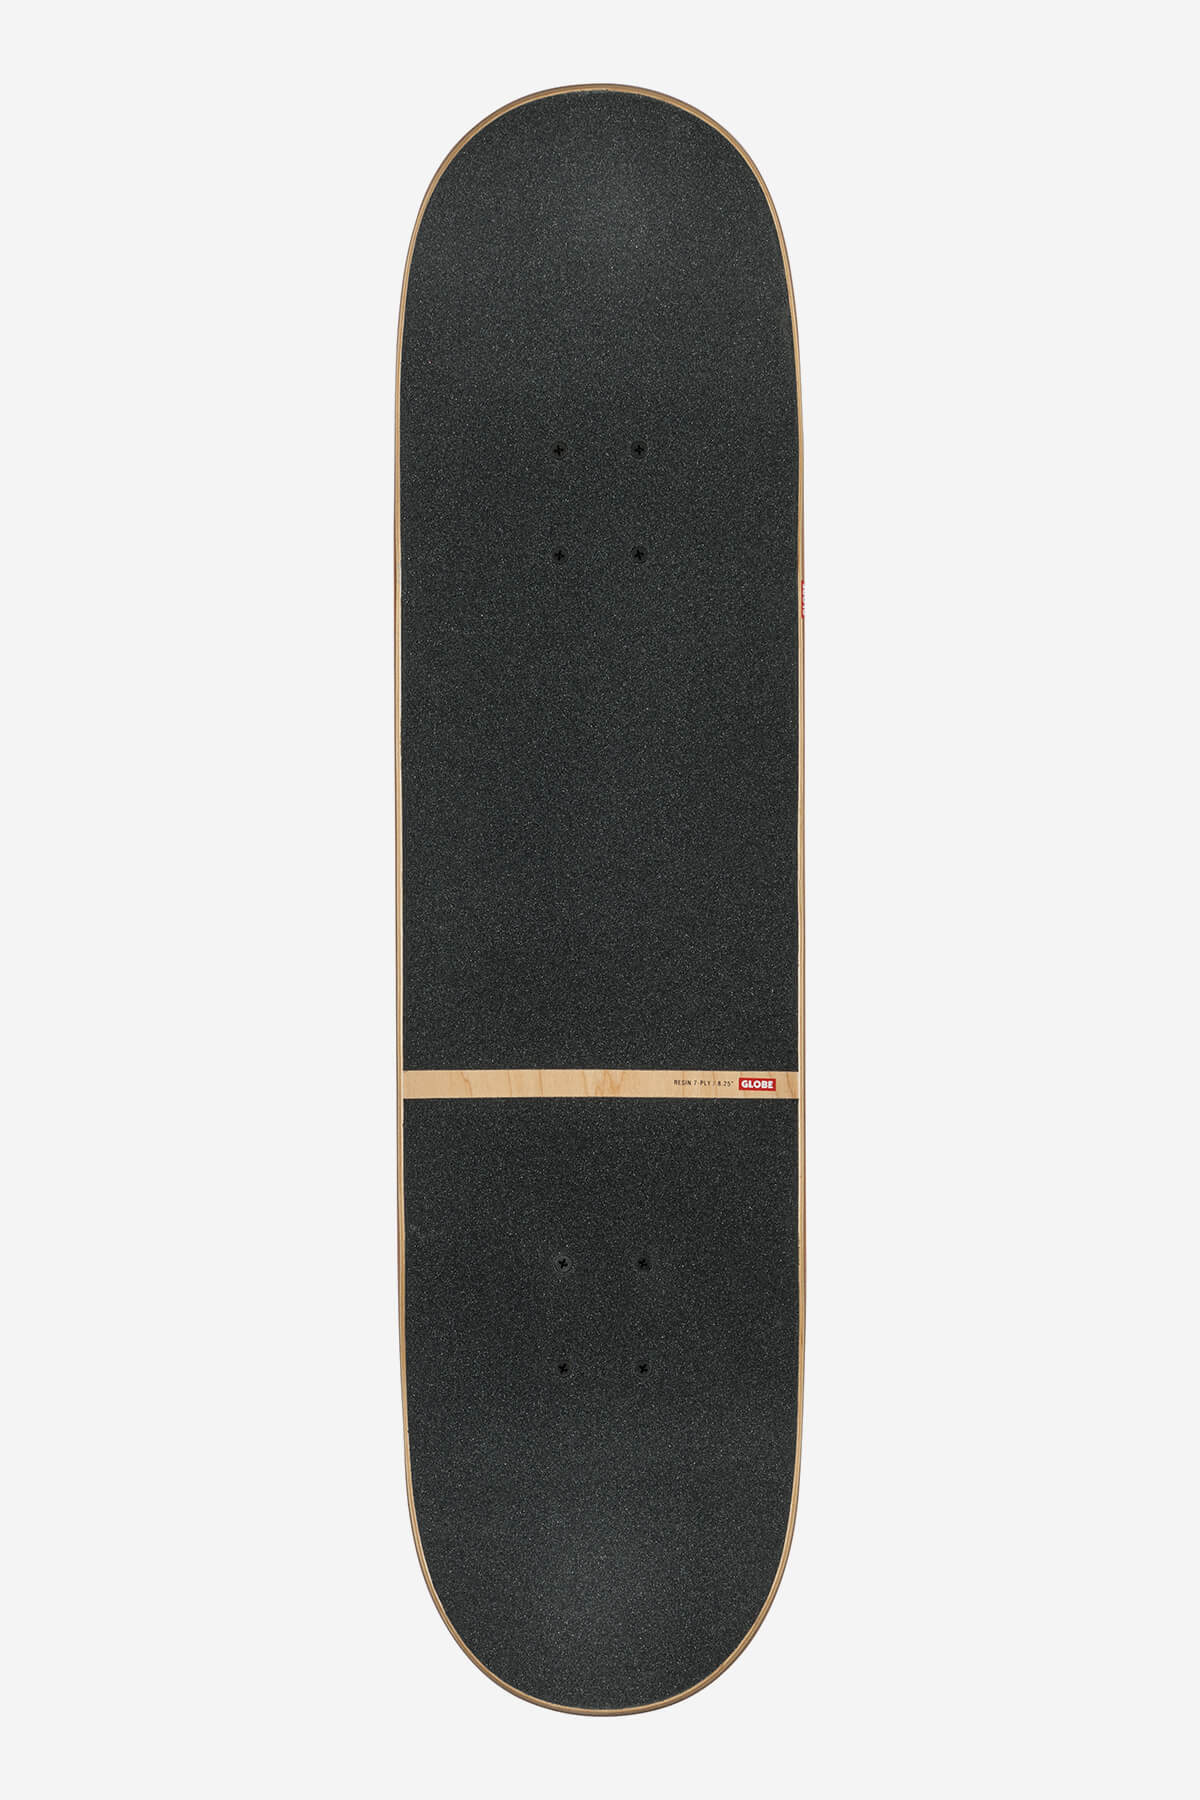 g2 rapid space asteroid 8,25" completo skateboard